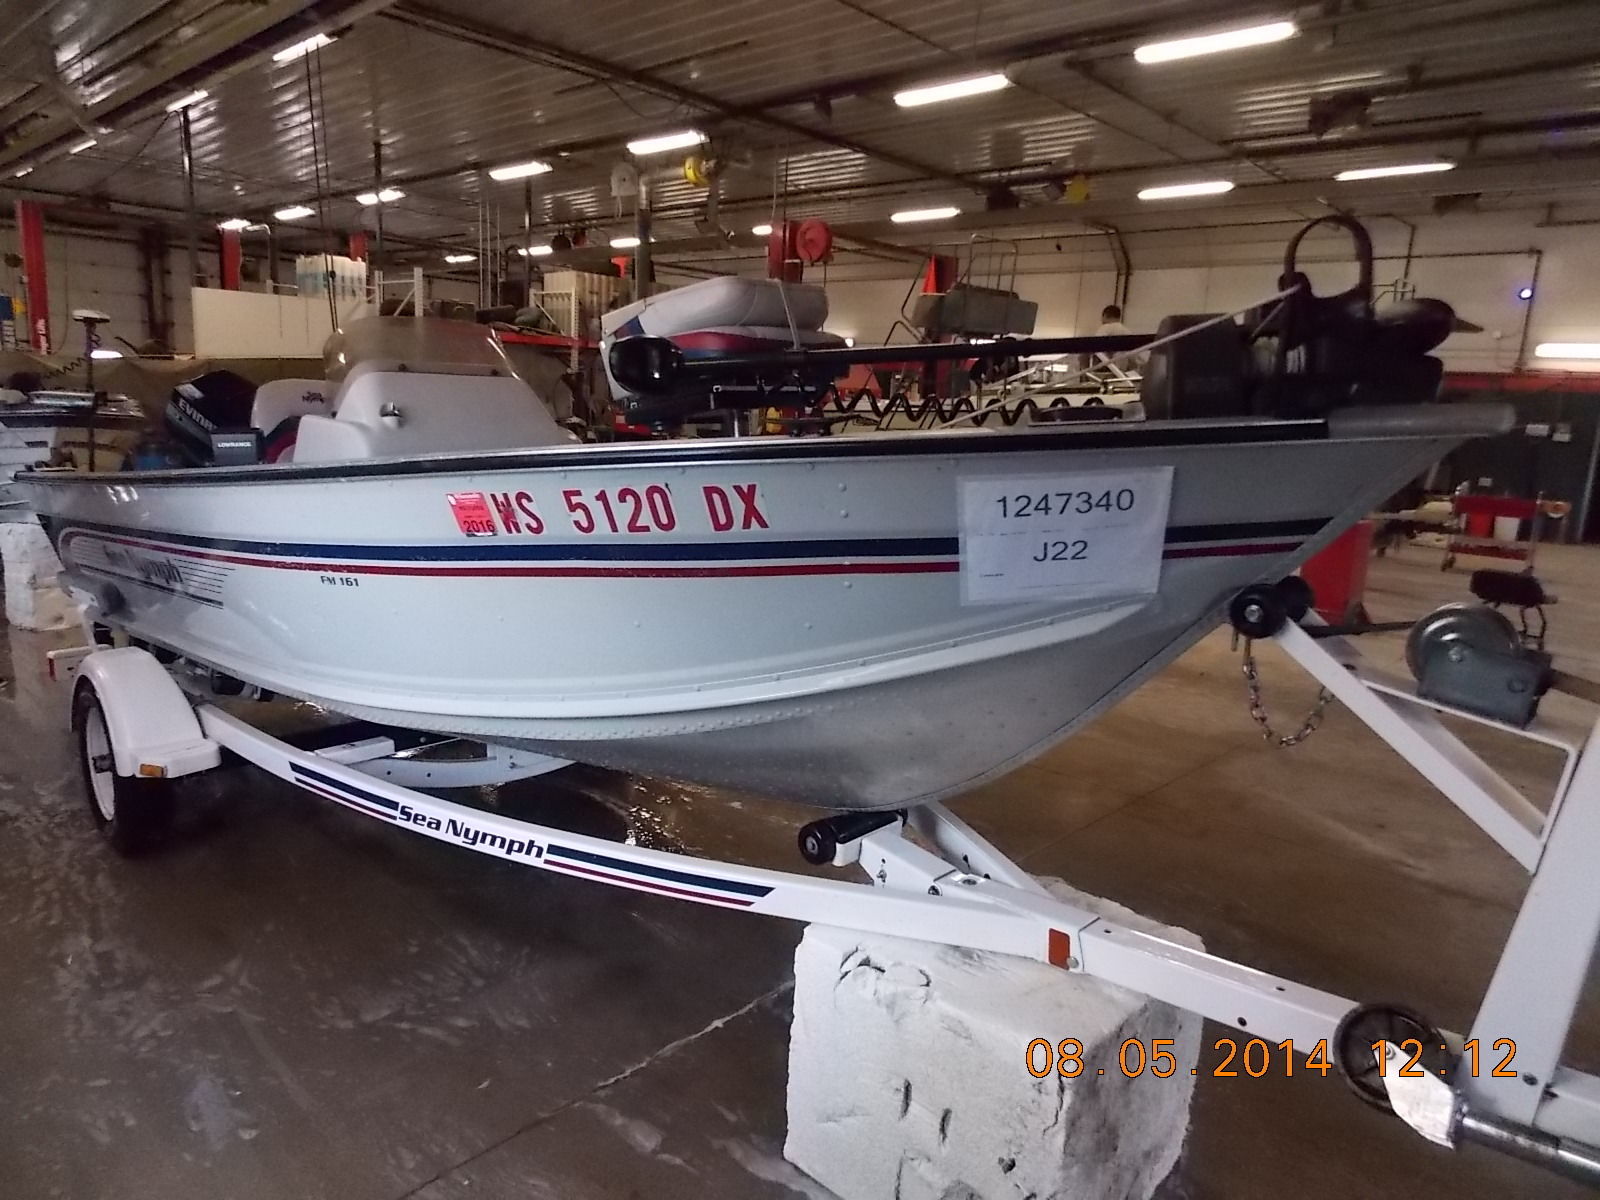 Sea Nymph FM161 1996 for sale for $1,895.